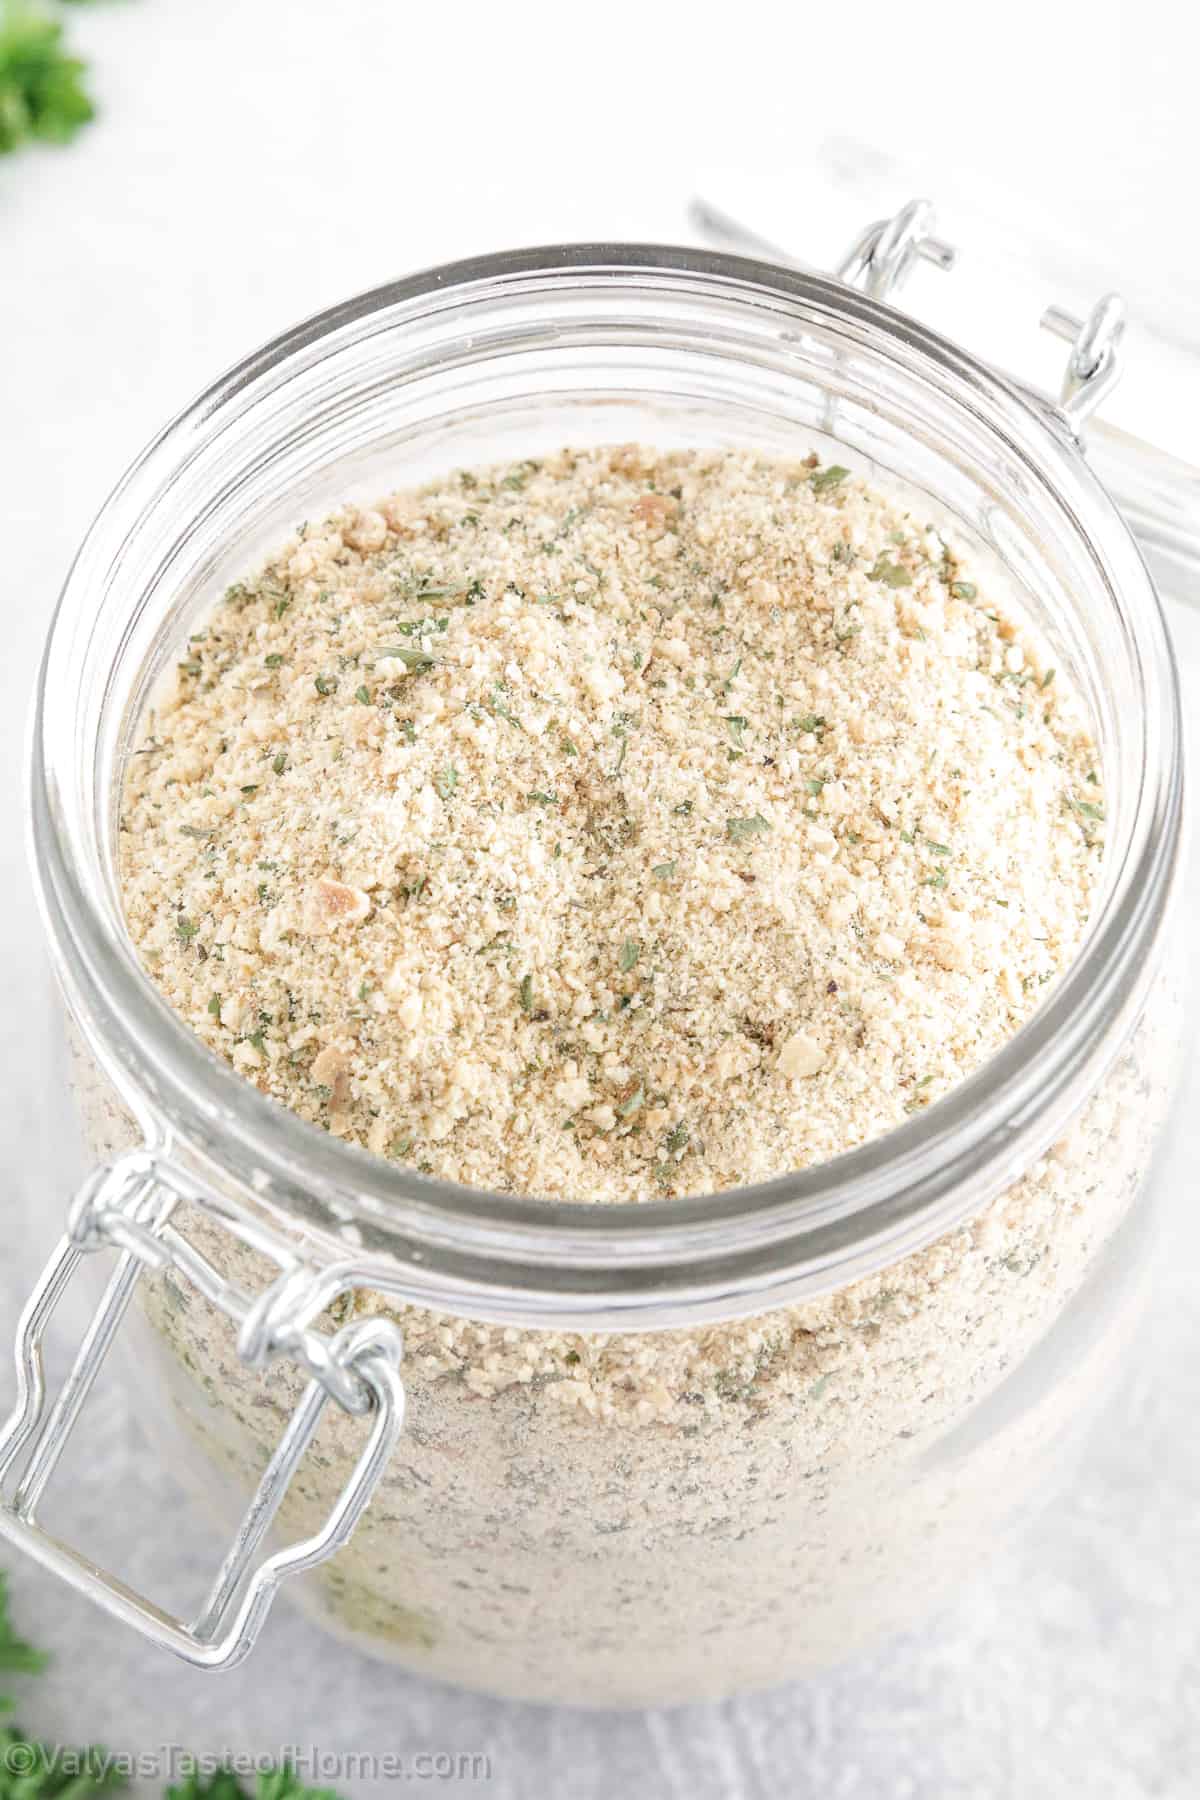 Bread crumbs are made by processing bread into a fine or coarse powder. They are a great way to add texture and flavor to your dishes.